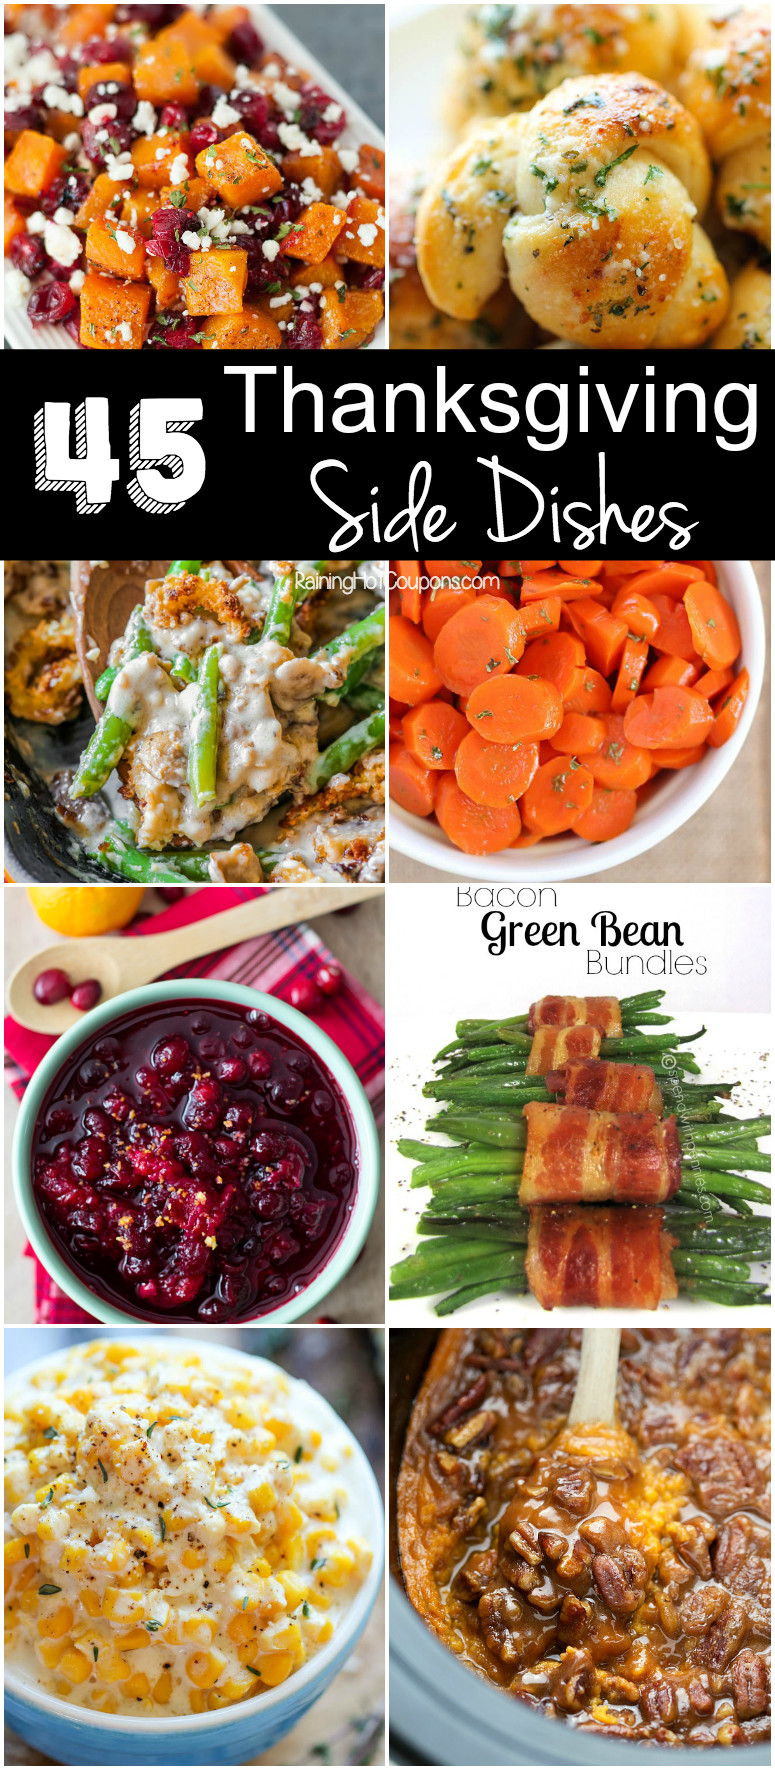 Good Thanksgiving Side Dishes
 45 Thanksgiving Side Dishes